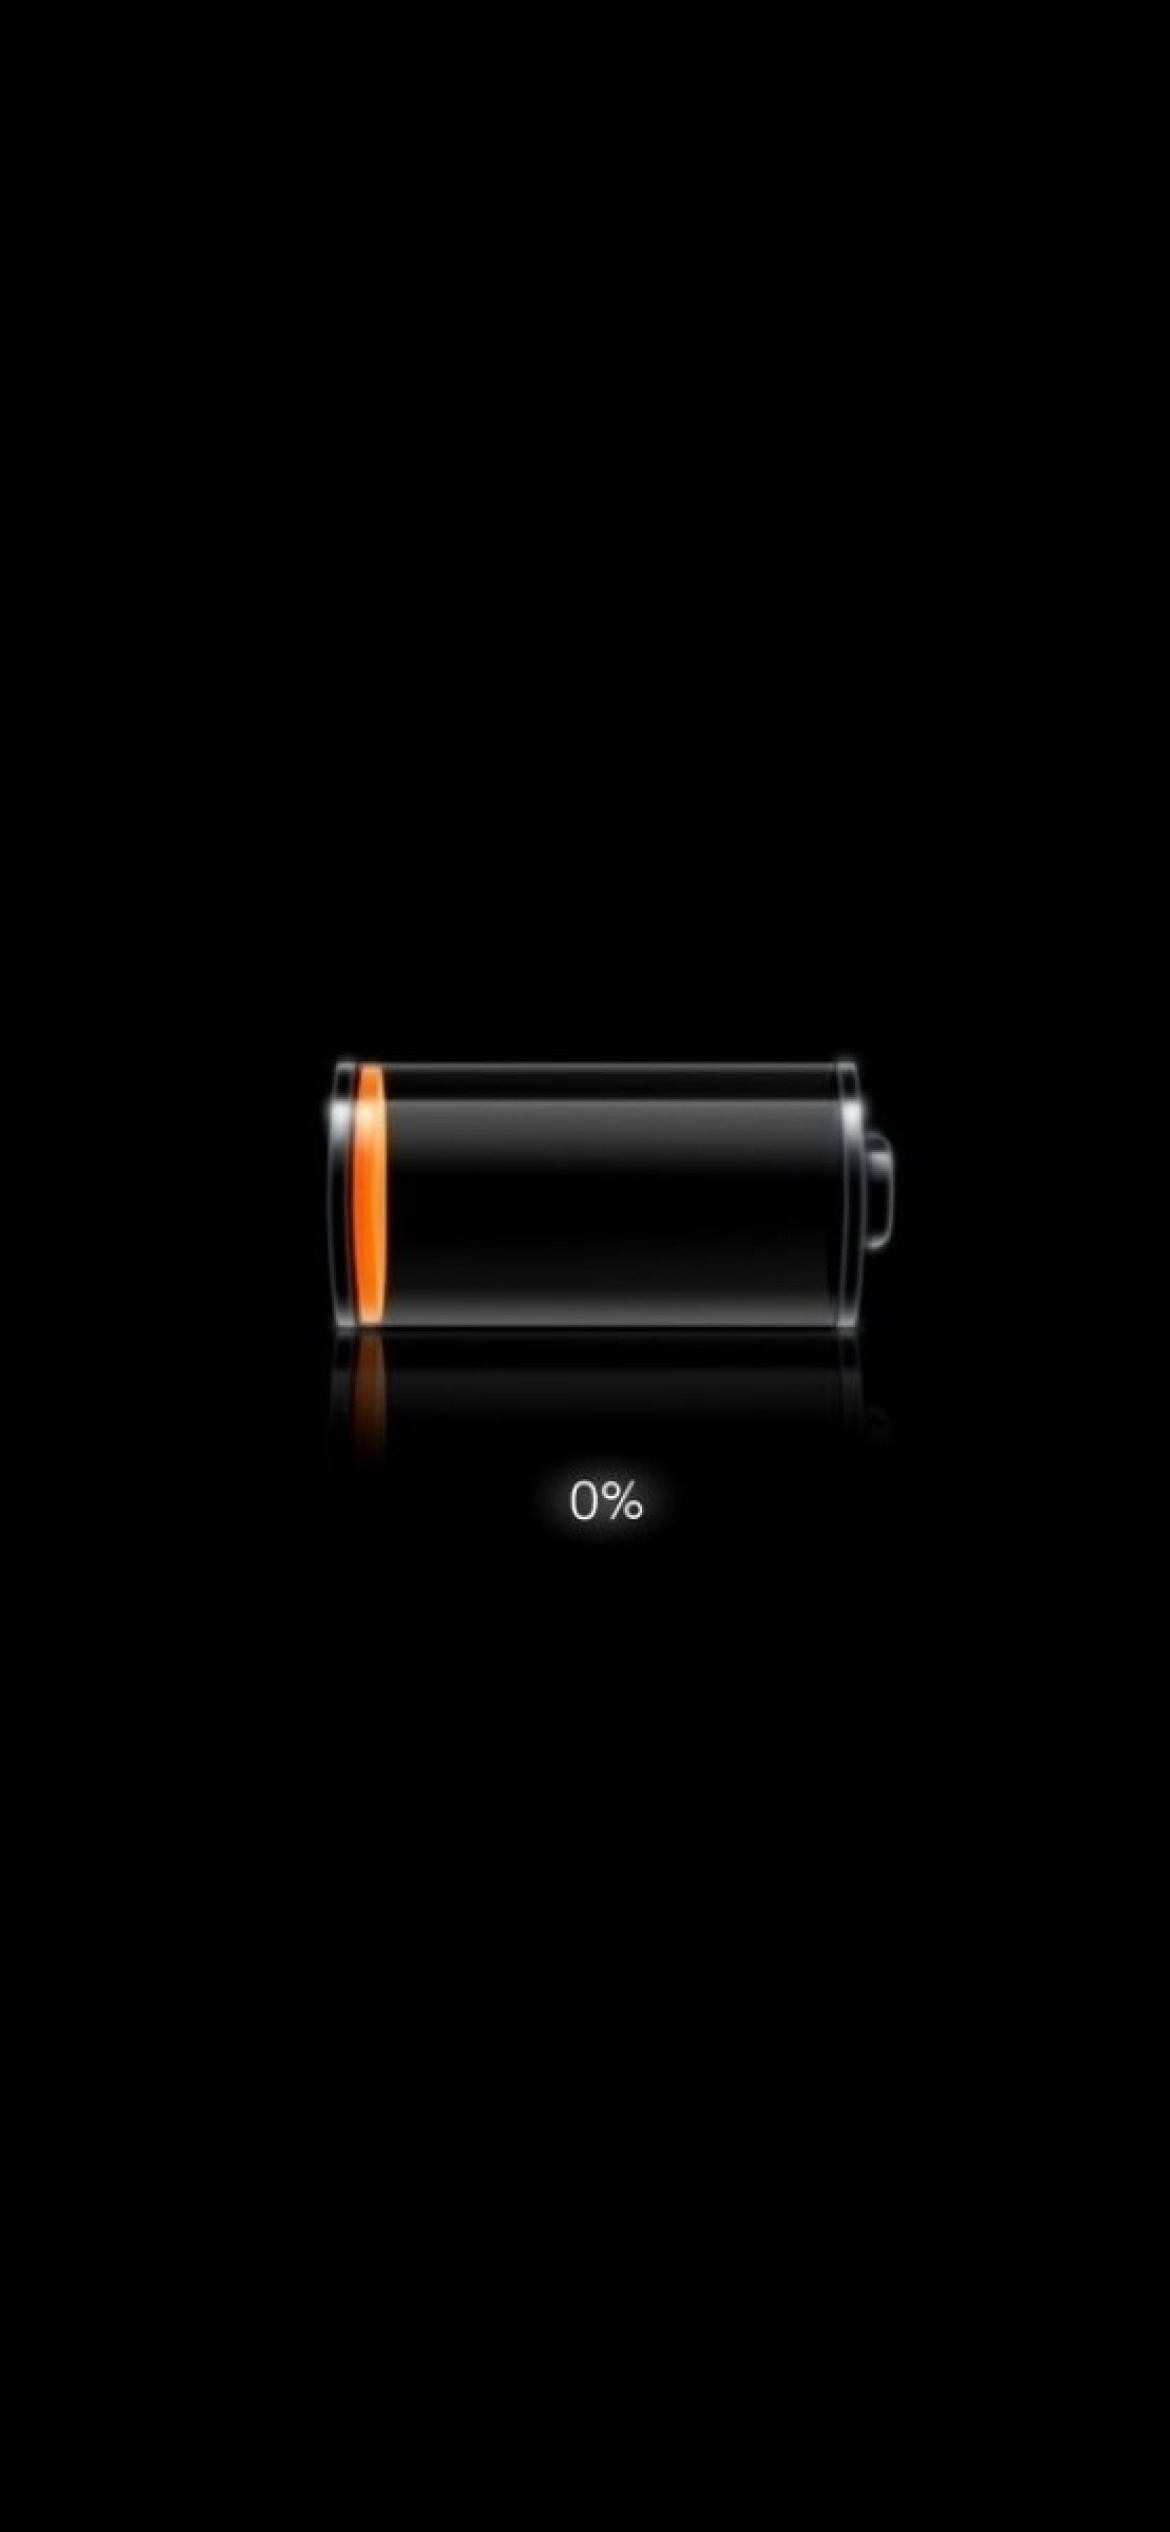 Das Battery Charge Wallpaper 1170x2532